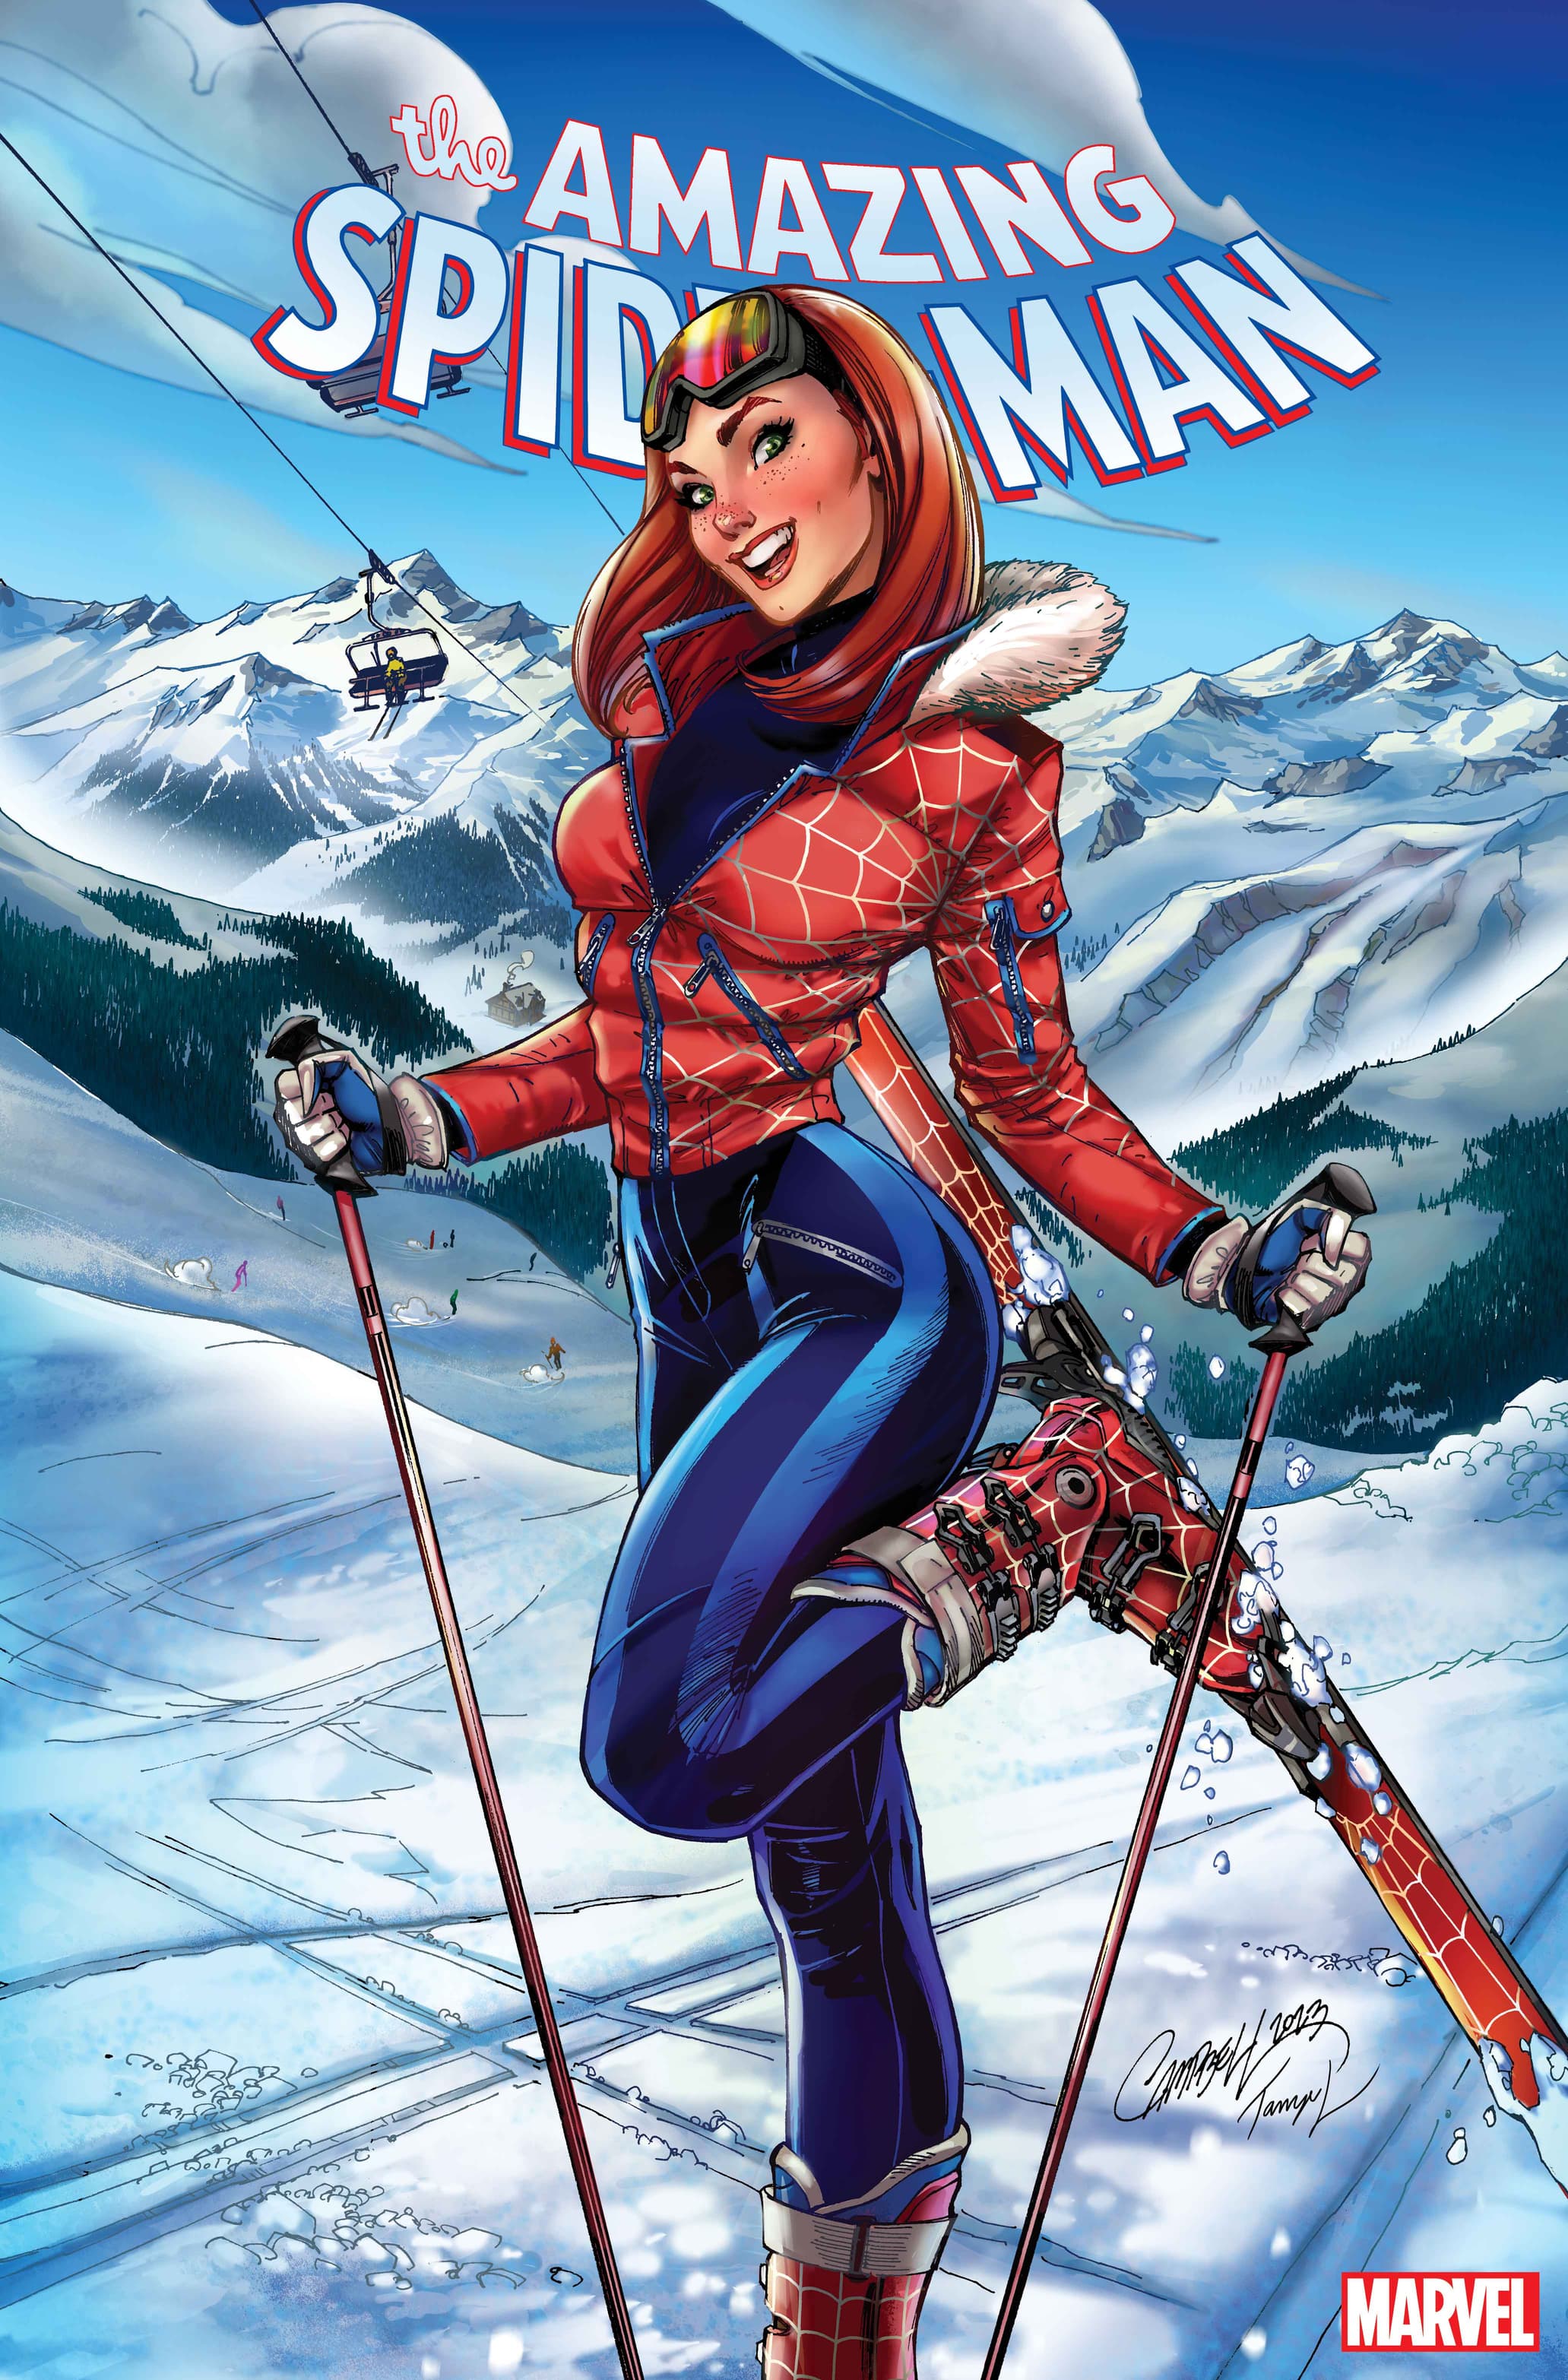 AMAZING SPIDER-MAN #40 Ski Chalet Variant Cover by J. Scott Campbell​​​​​​​